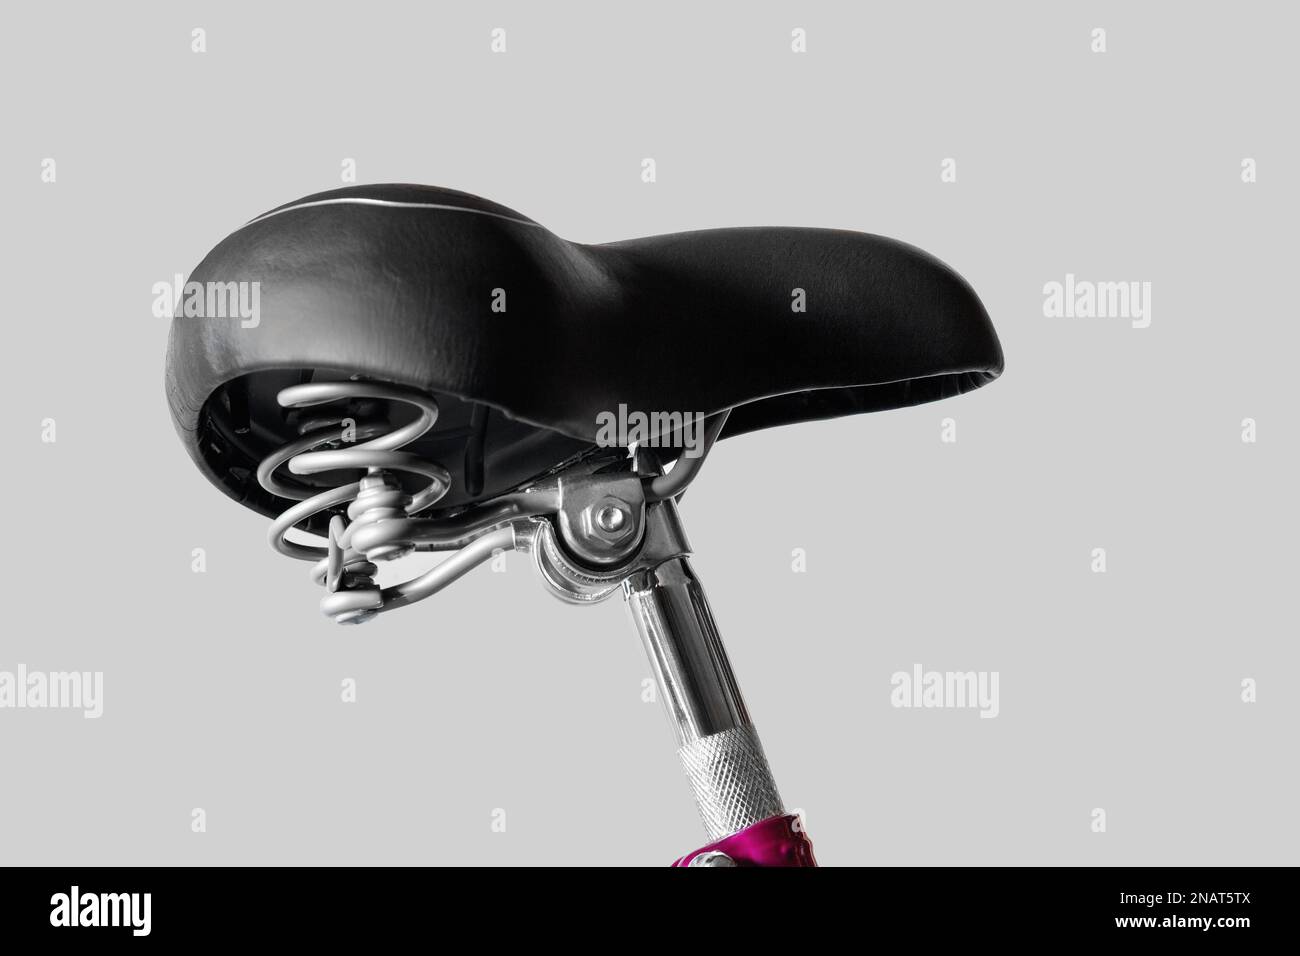 Bicycle saddle wide. Seat post. Close-up. Isolated on light gray background. Stock Photo